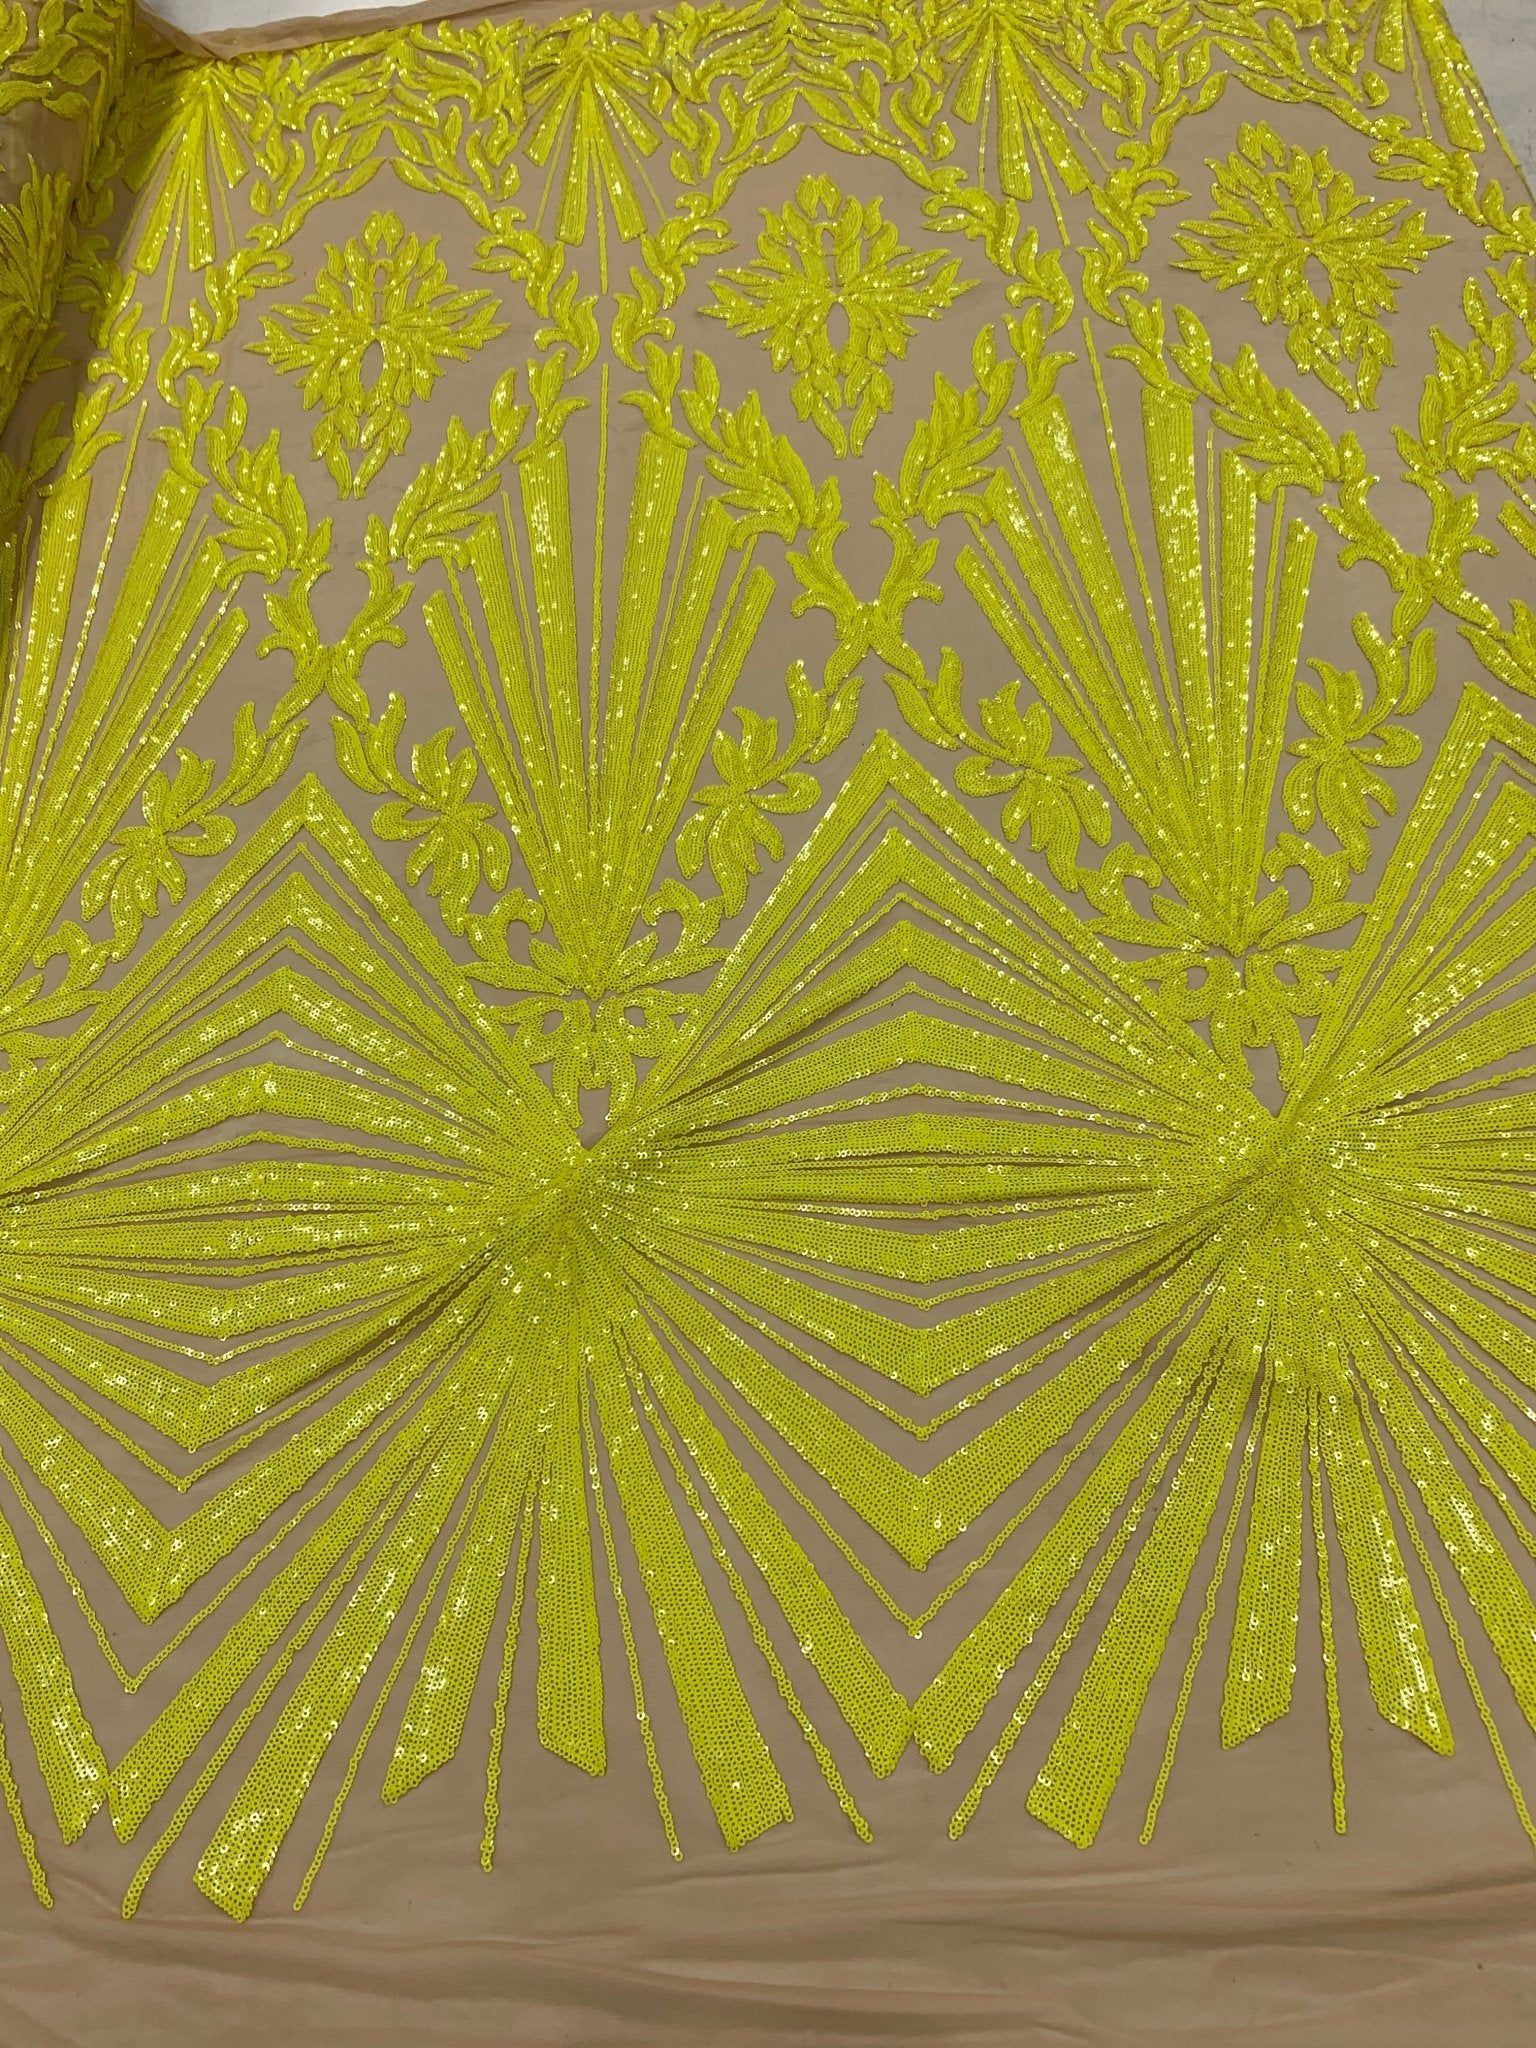 French Embroidery Stretch Sequins Fabric By The Yard on a Mesh LaceICEFABRICICE FABRICSYellow on Nude MeshFrench Embroidery Stretch Sequins Fabric By The Yard on a Mesh Lace ICEFABRIC Yellow on Nude Mesh